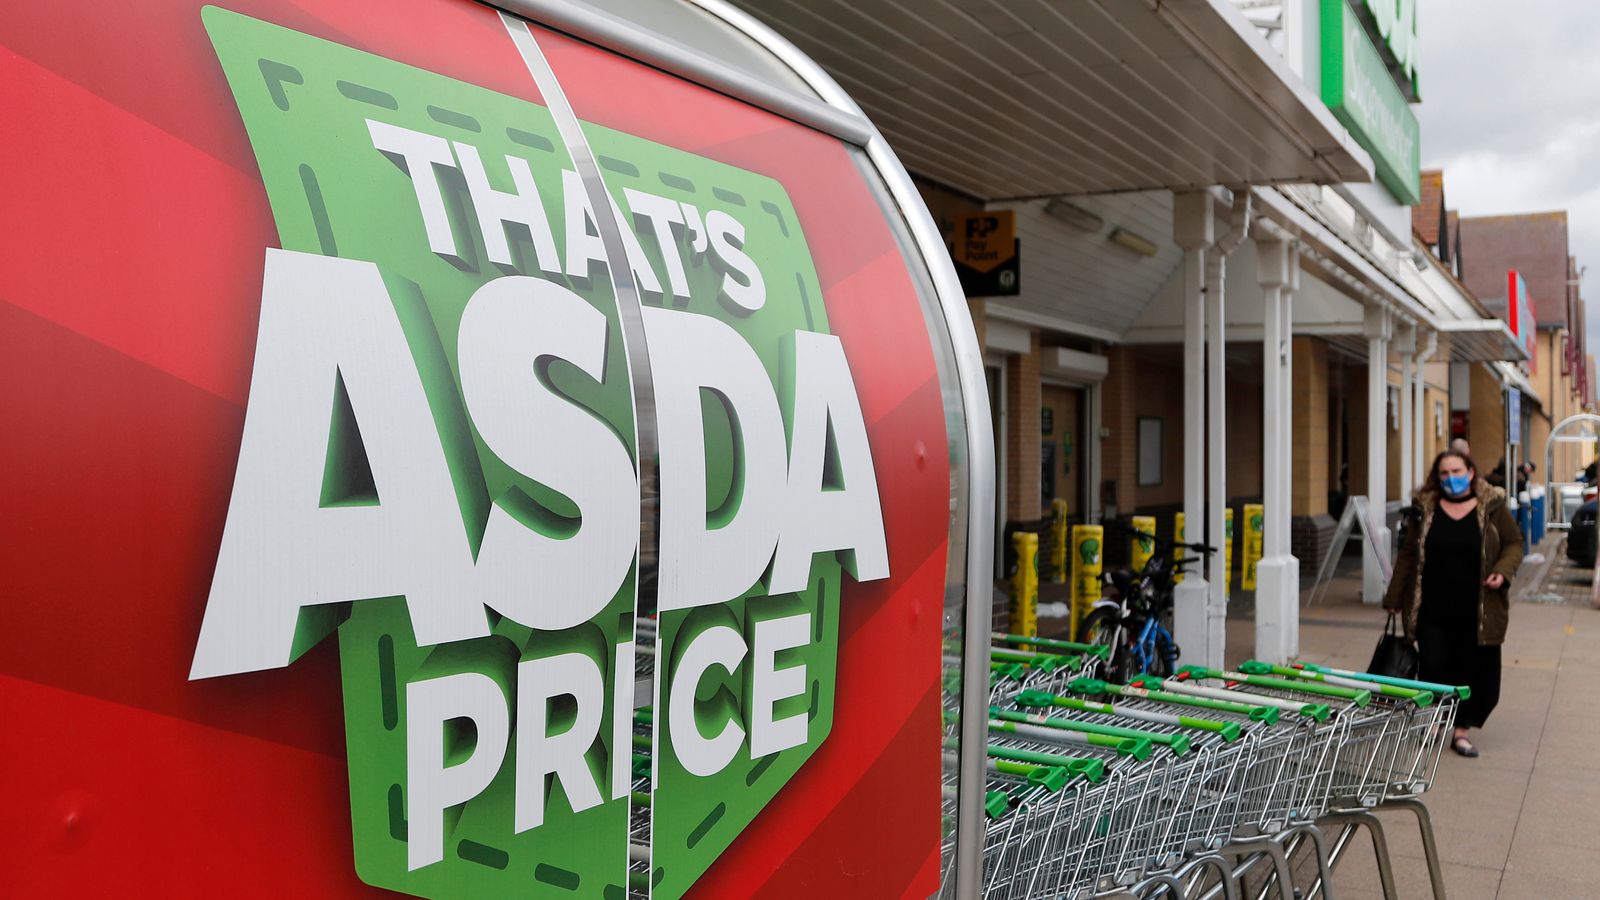 Asda faces prospect of strikes over plans that risk thousands of job losses